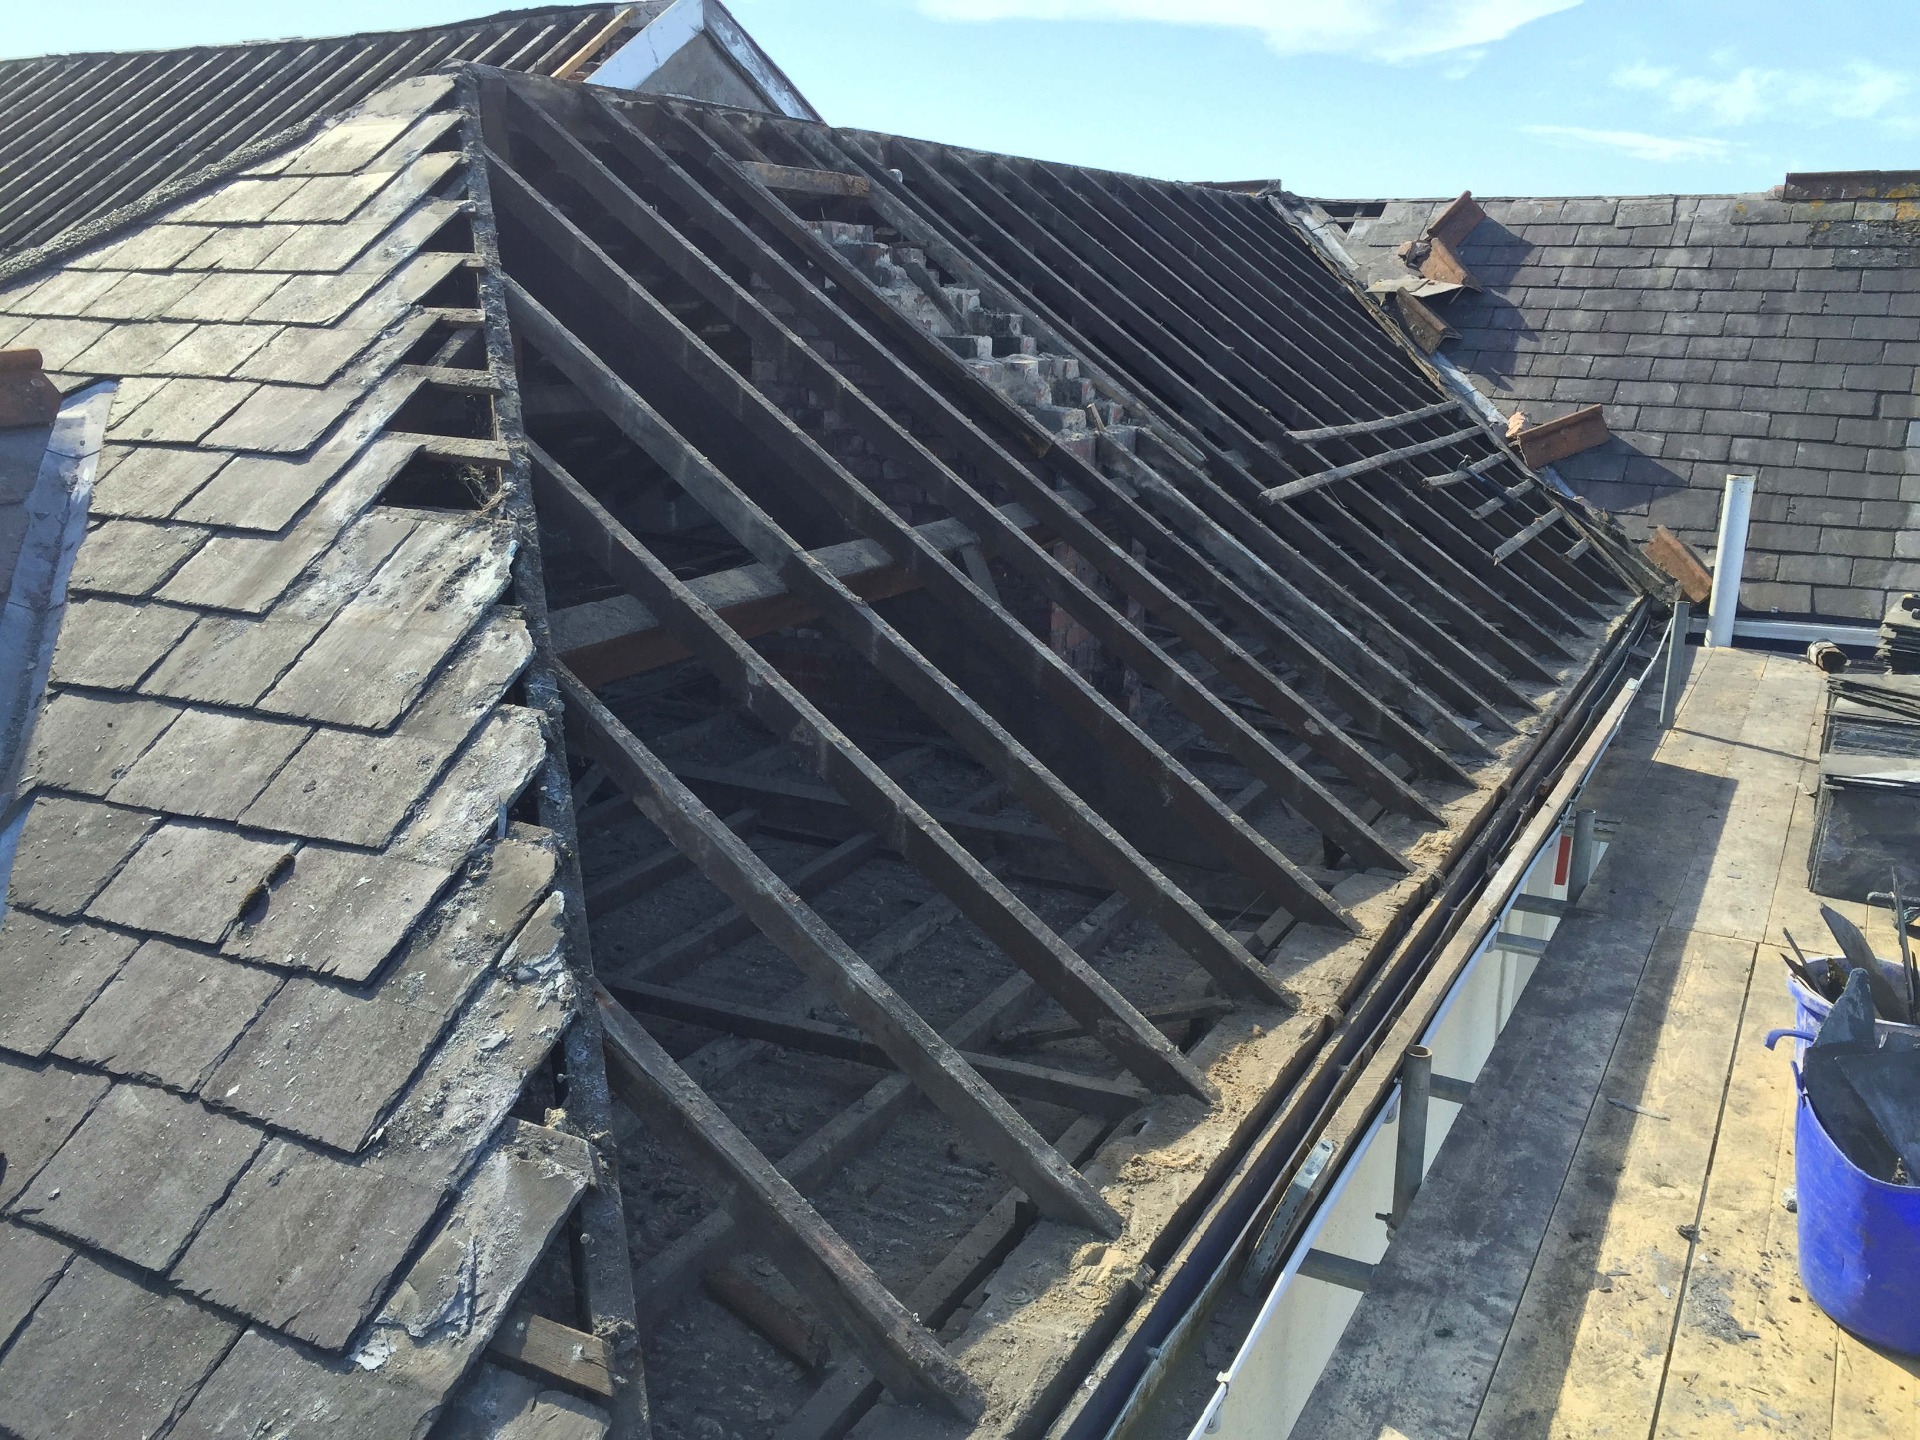 North Devon roof was stripped in sections to ensure we could keep the building dry in case of showers.